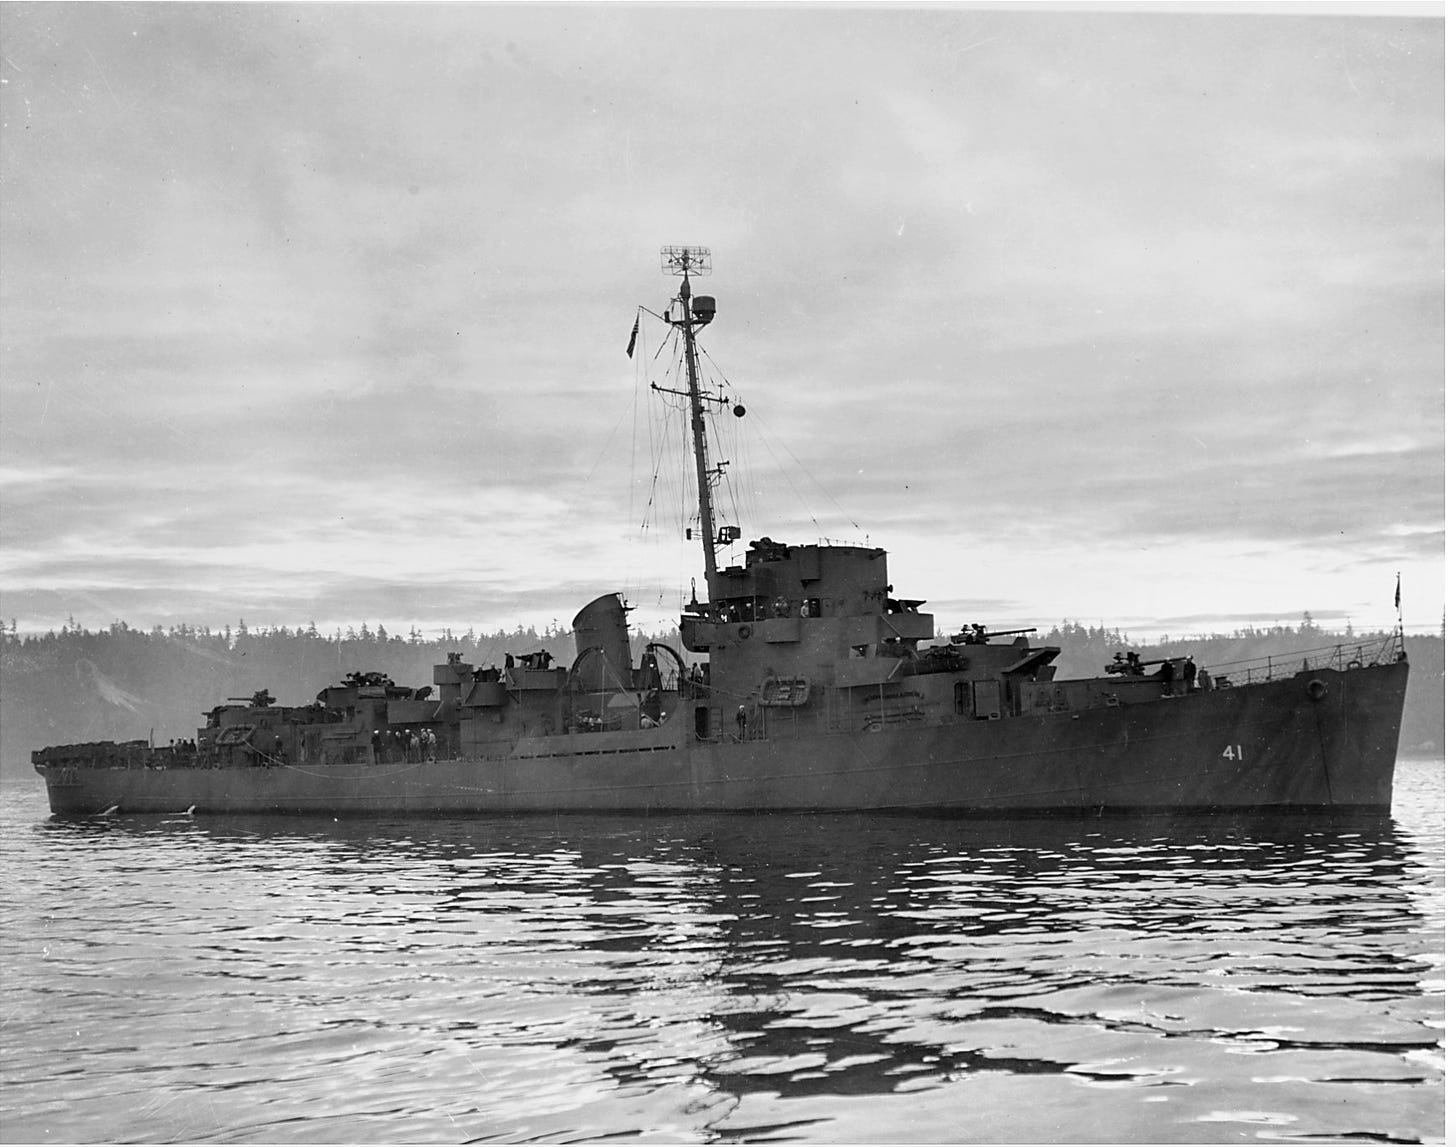 B&W photo of a WWII Naval battleship parked in Puget Sound